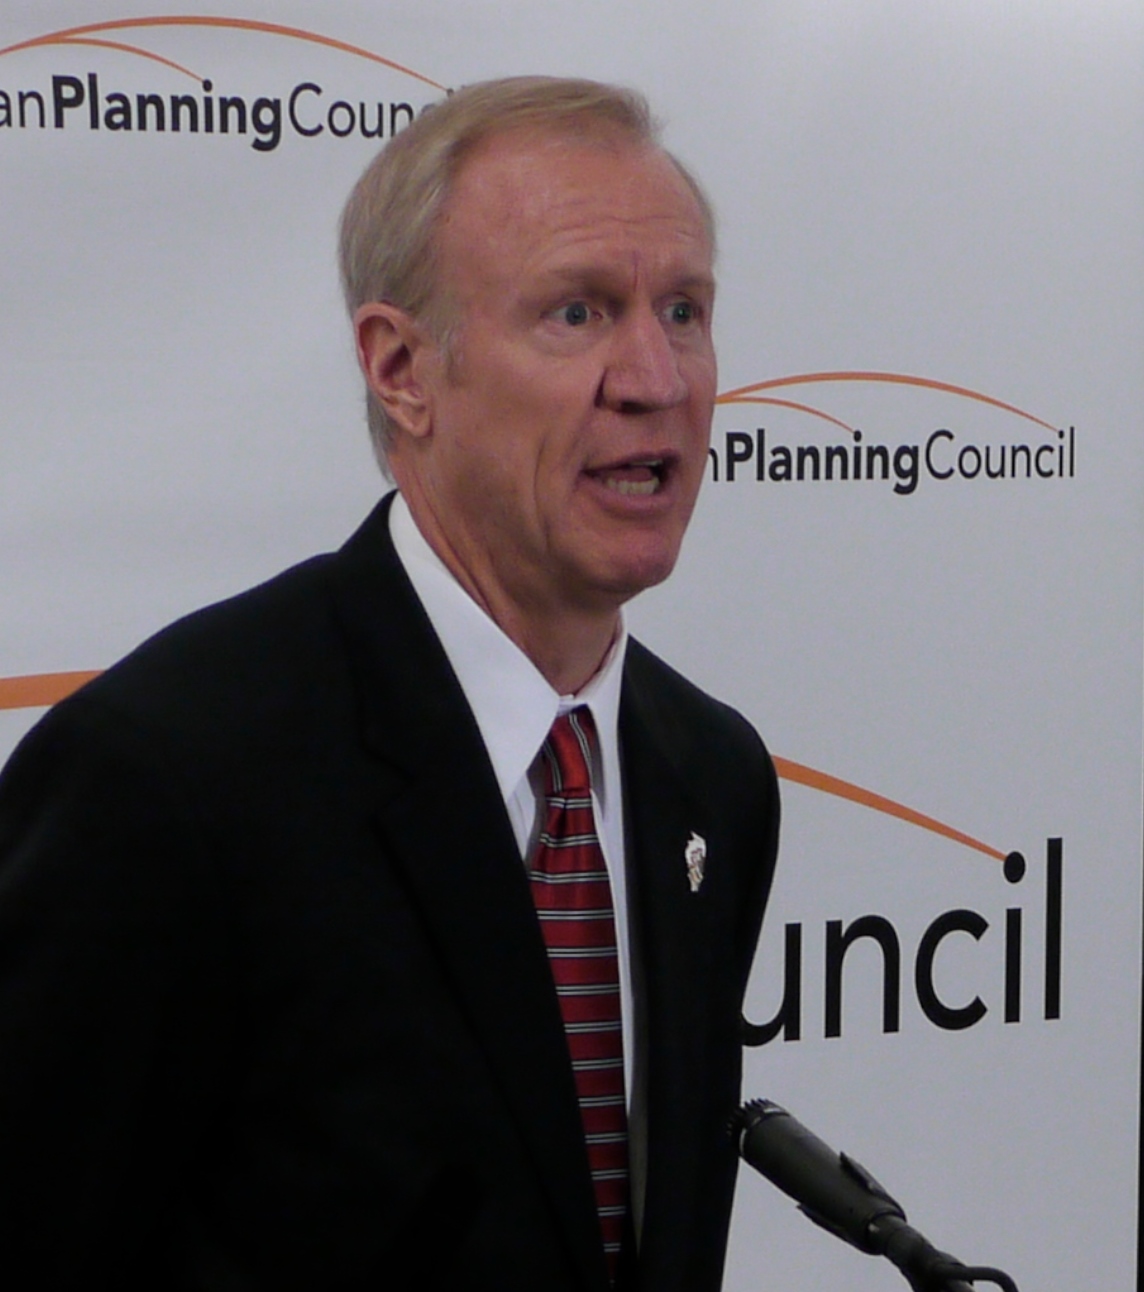 Governor Rauner Releases Private Account emails